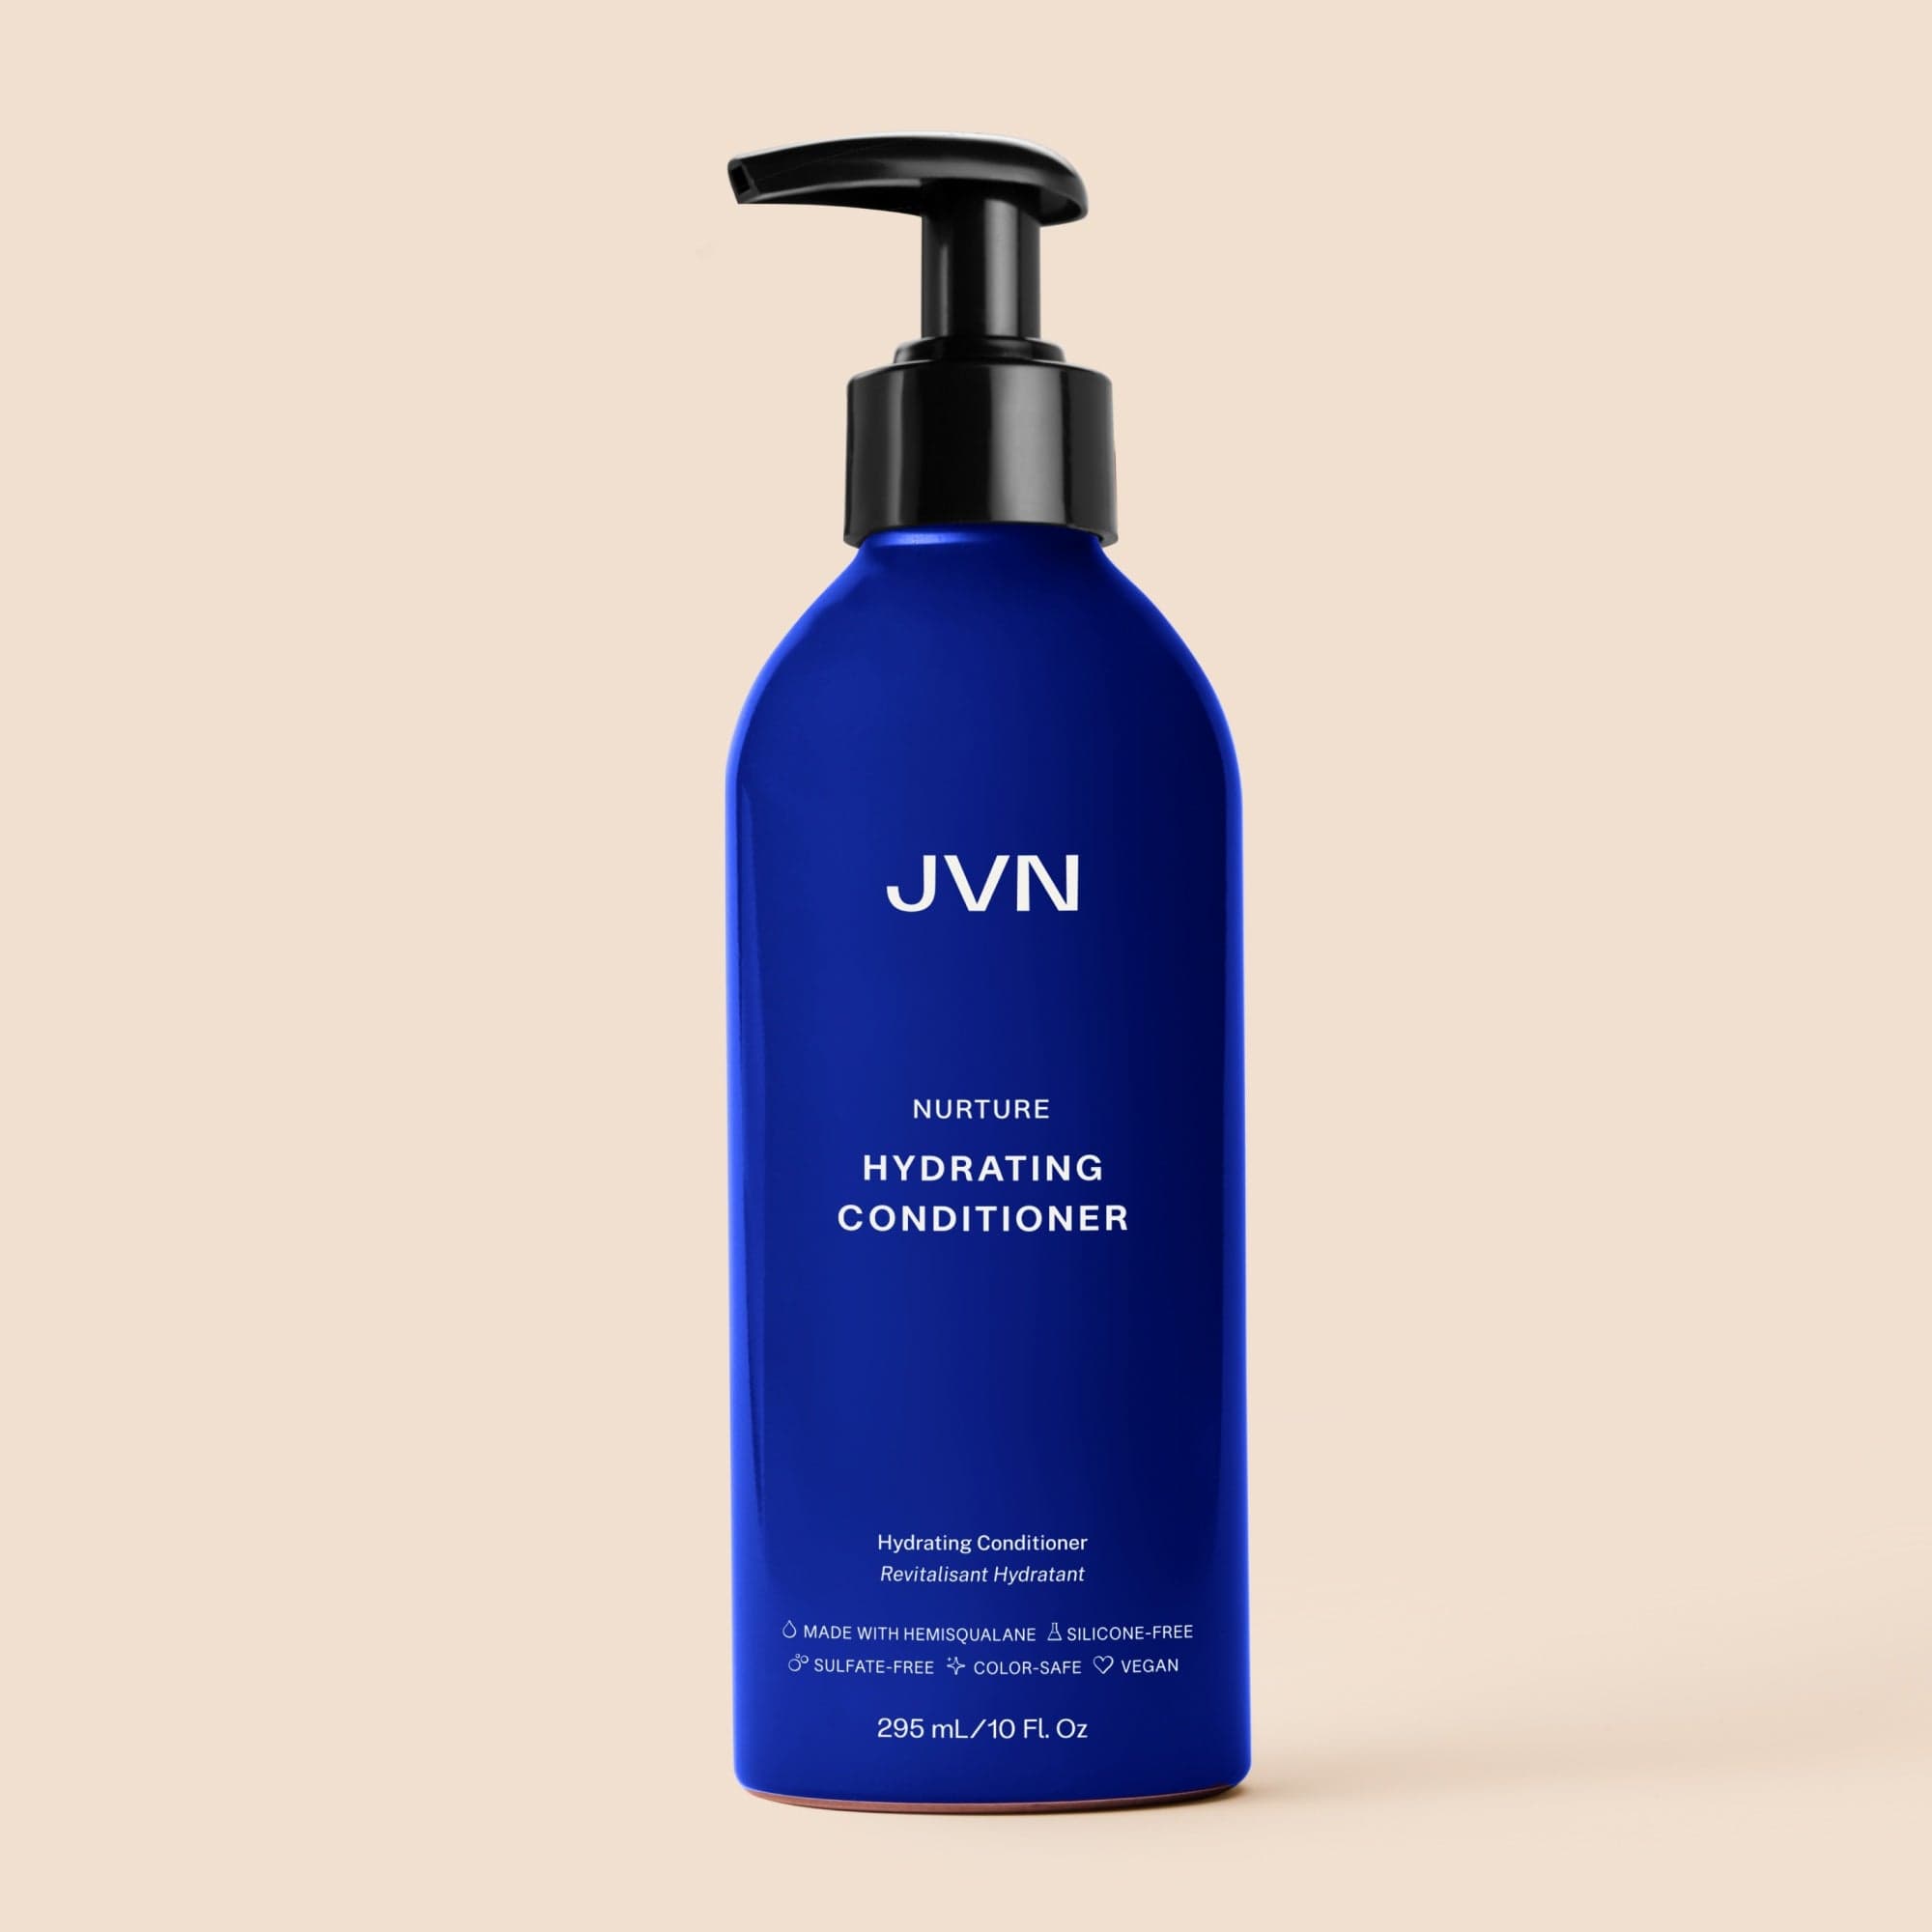 JVN Conditioner NEW Nurture Hydrating Conditioner Nurture Hydrating Conditioner | Moisturizing Conditioner | JVN sulfate-free silicone-free sustainable